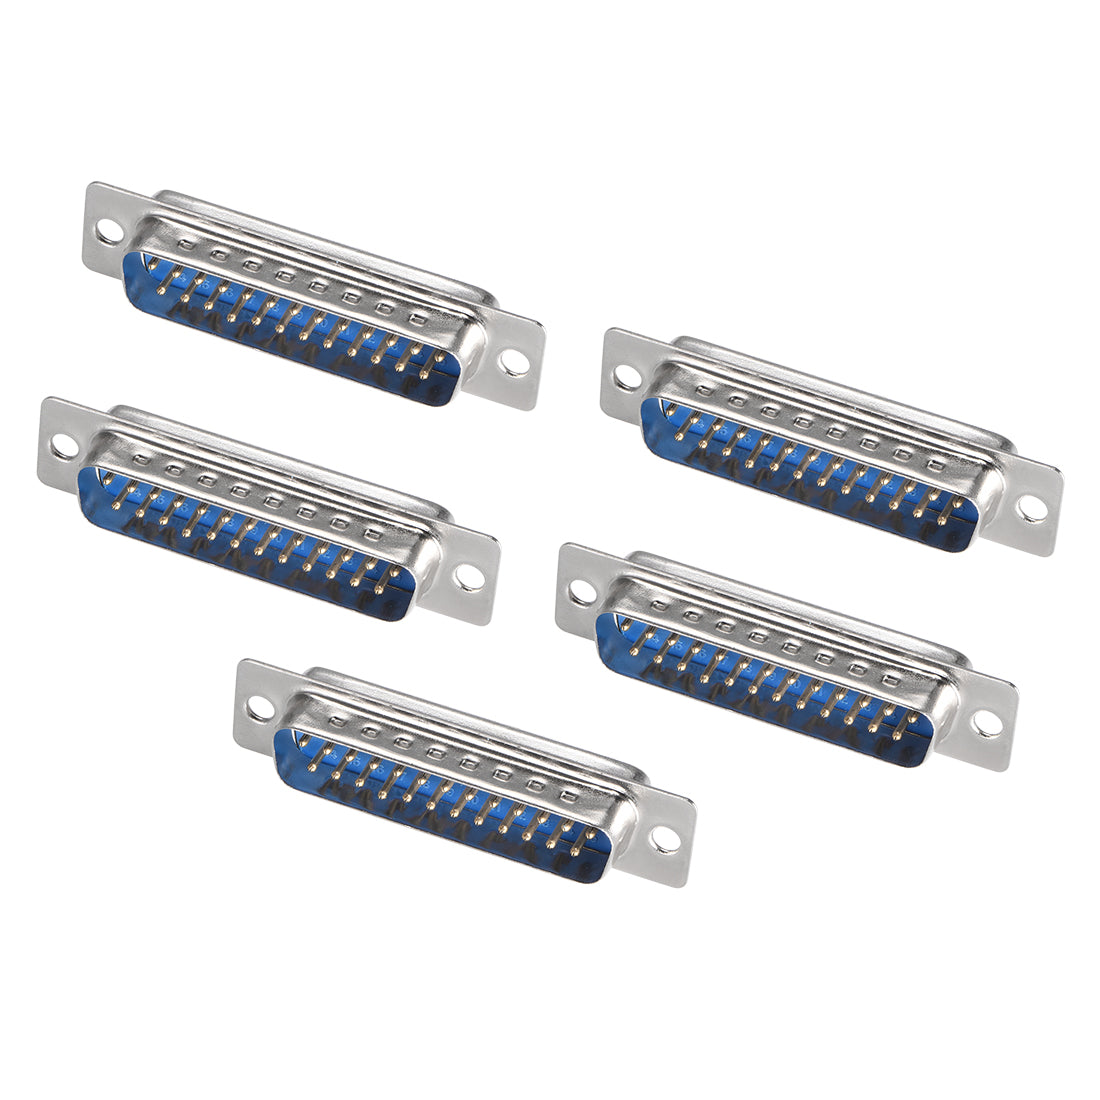 uxcell Uxcell D-sub Connector Male Plug 25-pin 2-row Port Terminal Breakout Solder Type for Mechanical Equipment CNC Computers Blue 5pcs